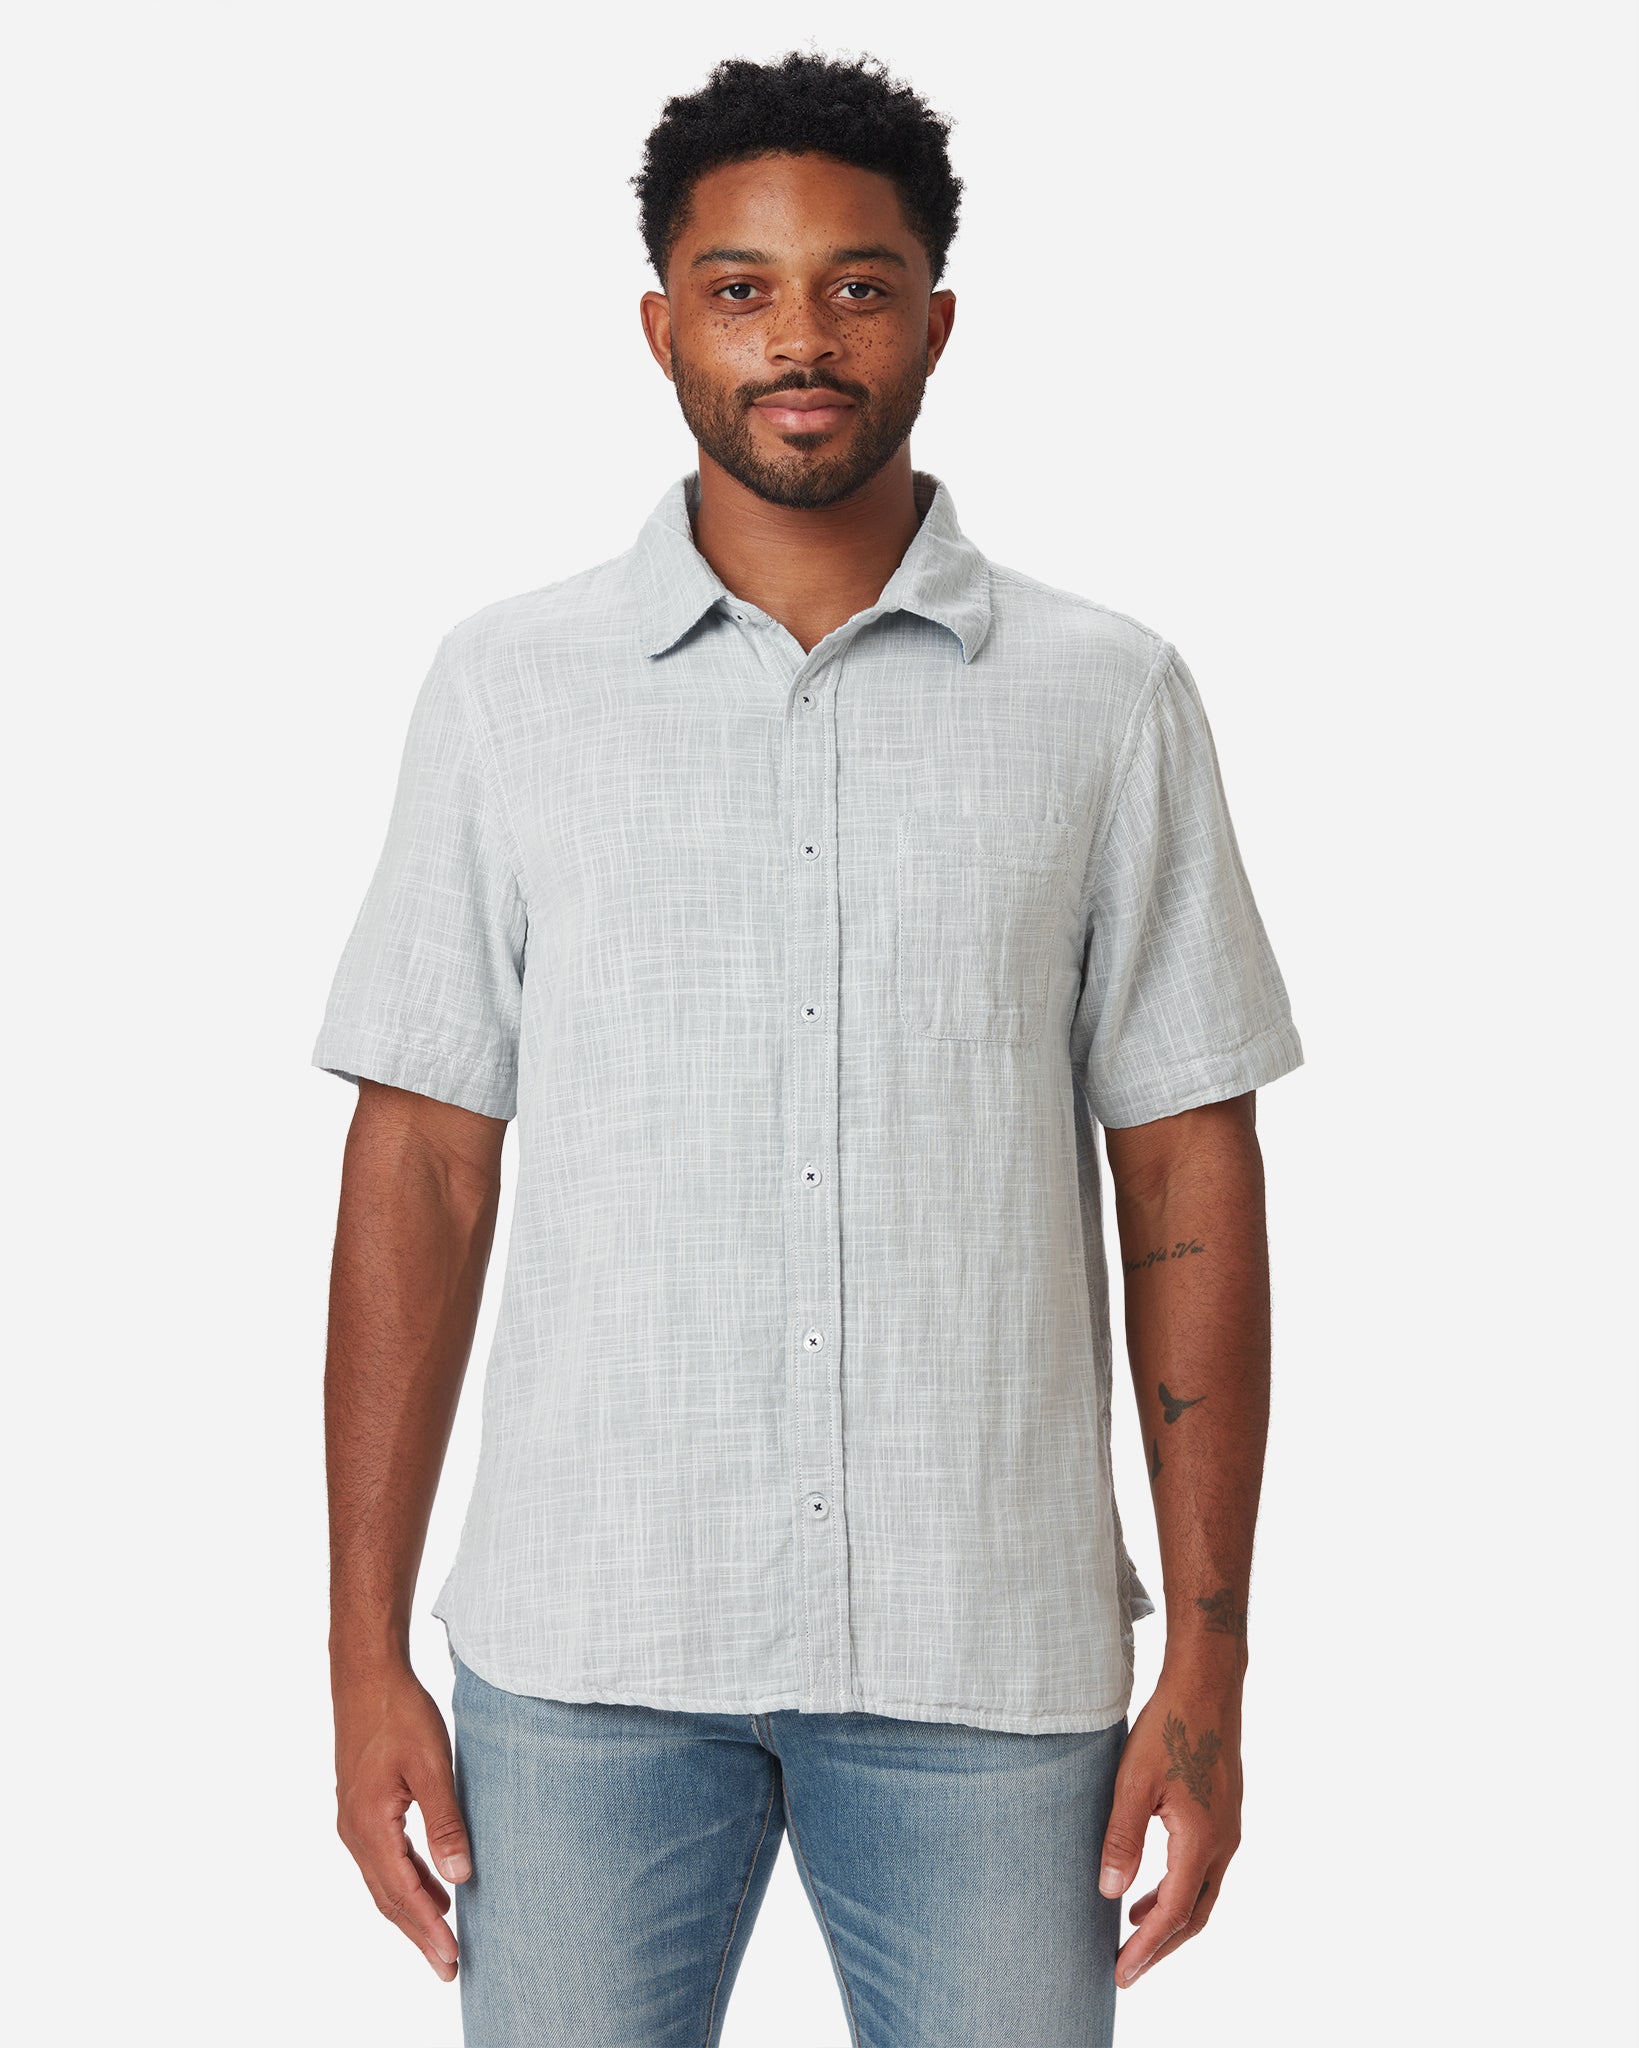 Model with direct frontward gaze wearing Ace Rivington collared grey short-sleeved double gauze soft-textured cotton shirt with indigo blue interior, pearl buttons, and left-breast pocket and a pair of Ace Rivington medium vintage medium light blue denim jeans